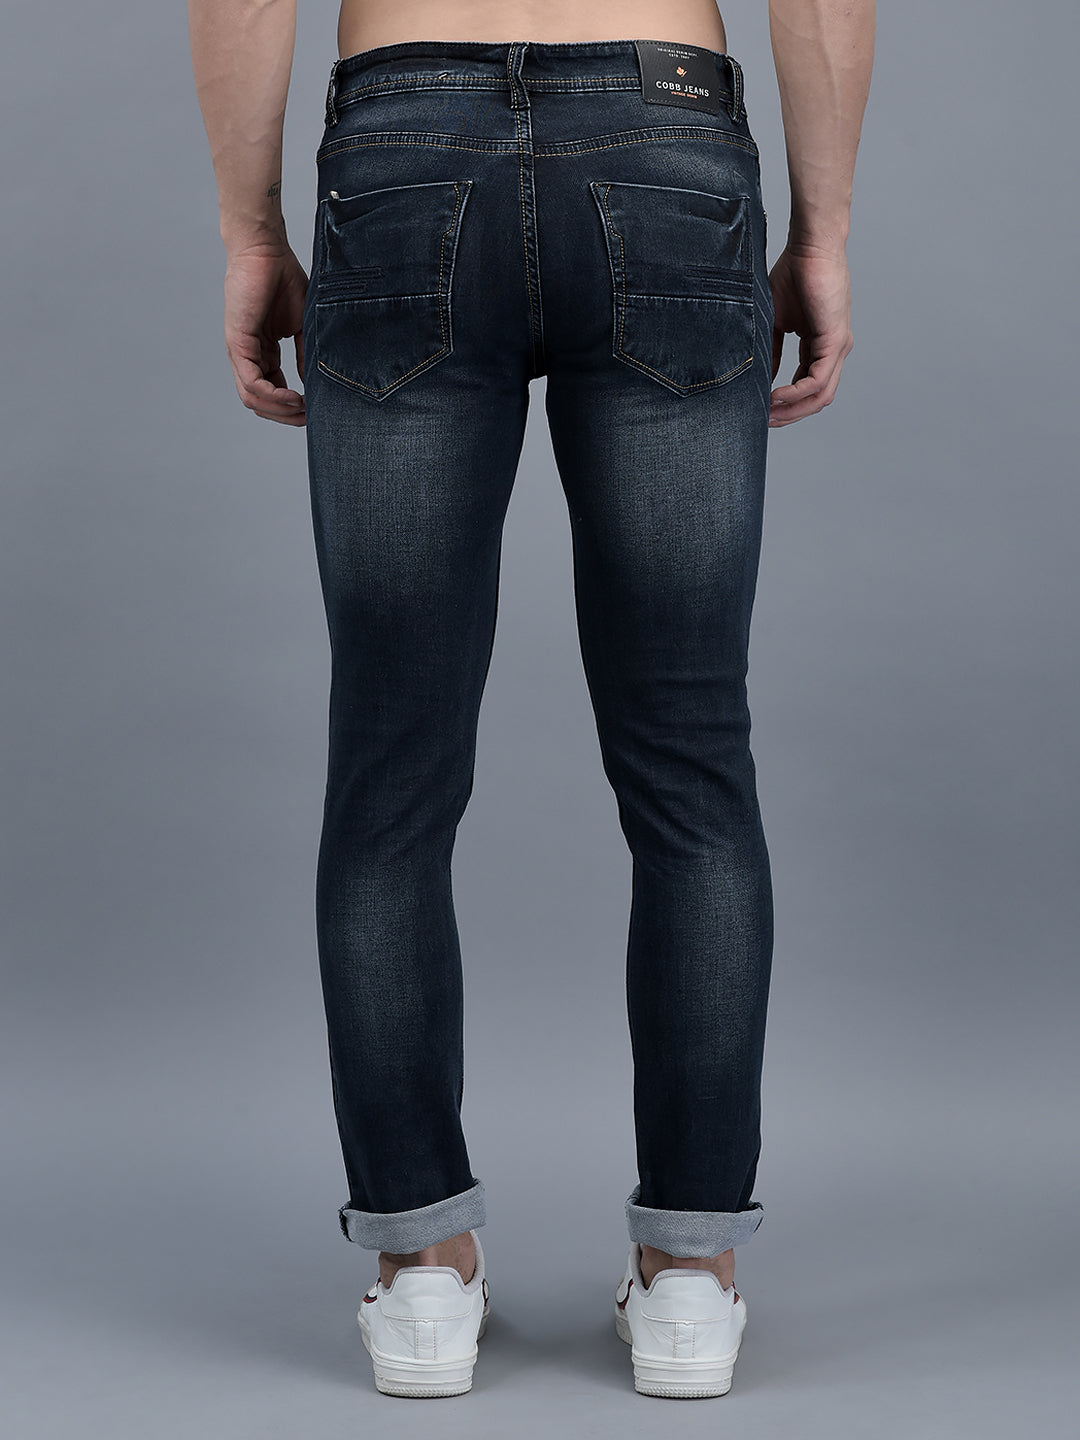 Cobb Navy Blue Ultra Fit Jeans: Stylish Comfort for Every